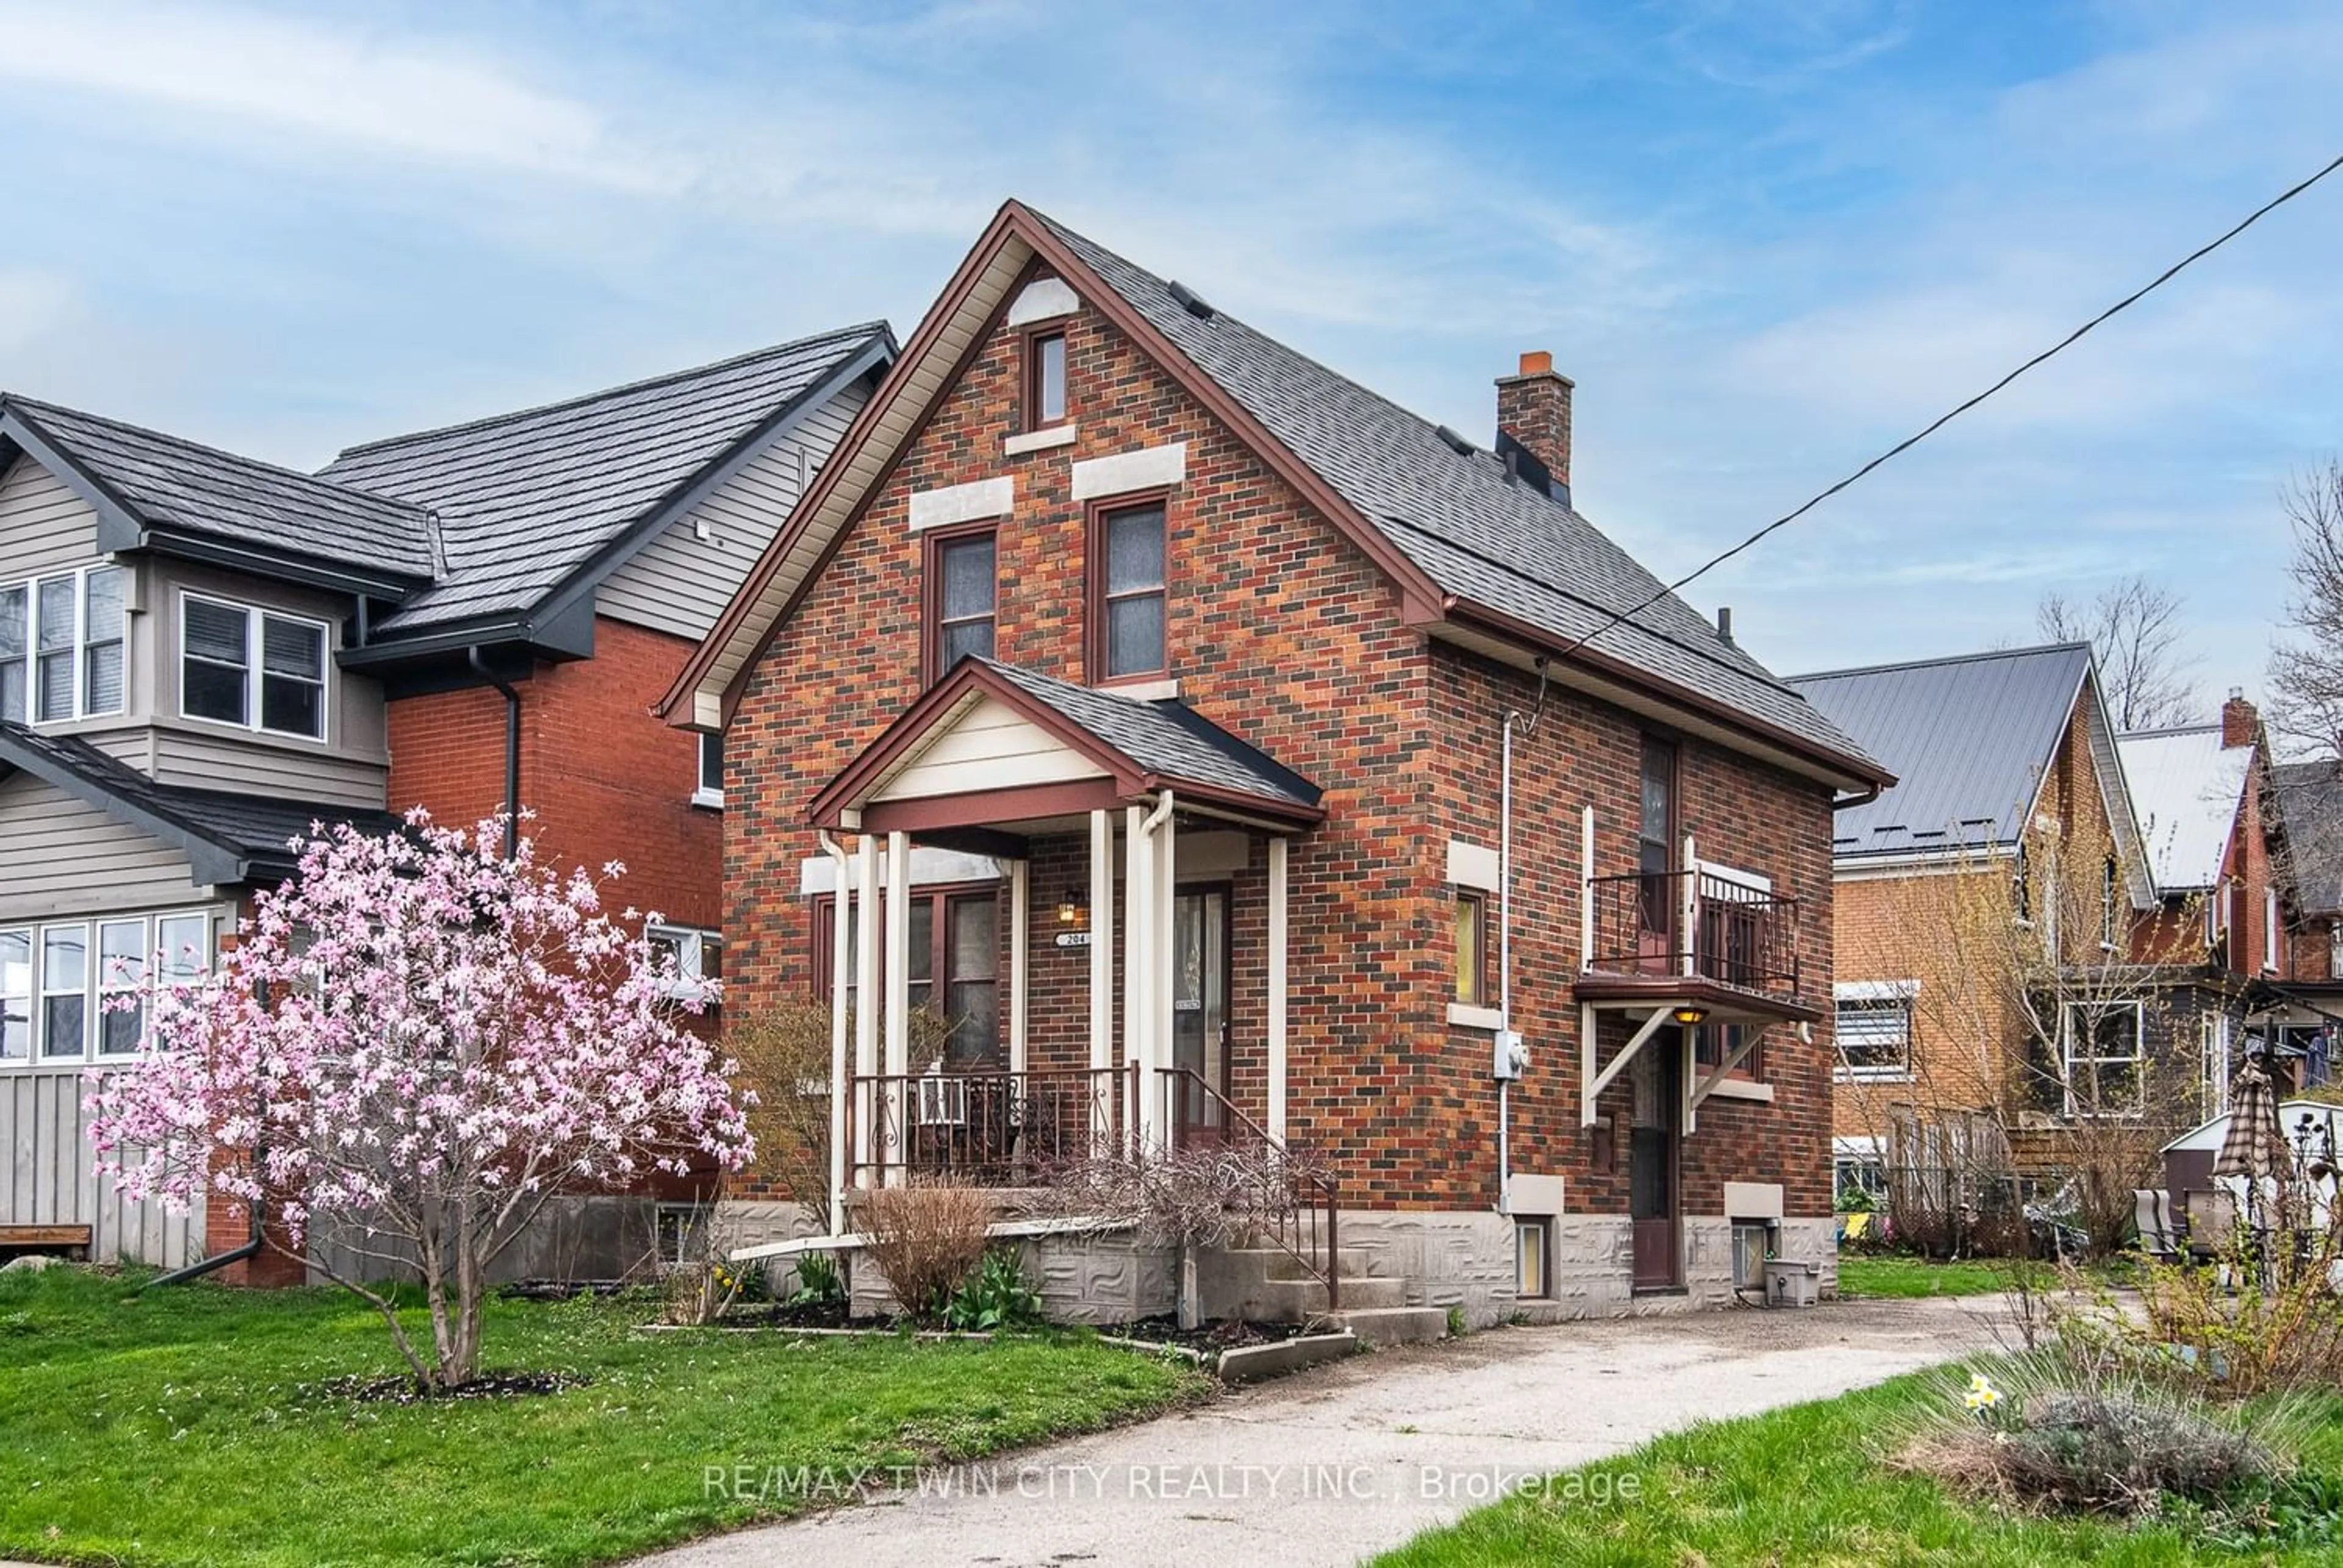 Home with brick exterior material for 204 Kent Ave, Kitchener Ontario N2G 3R4